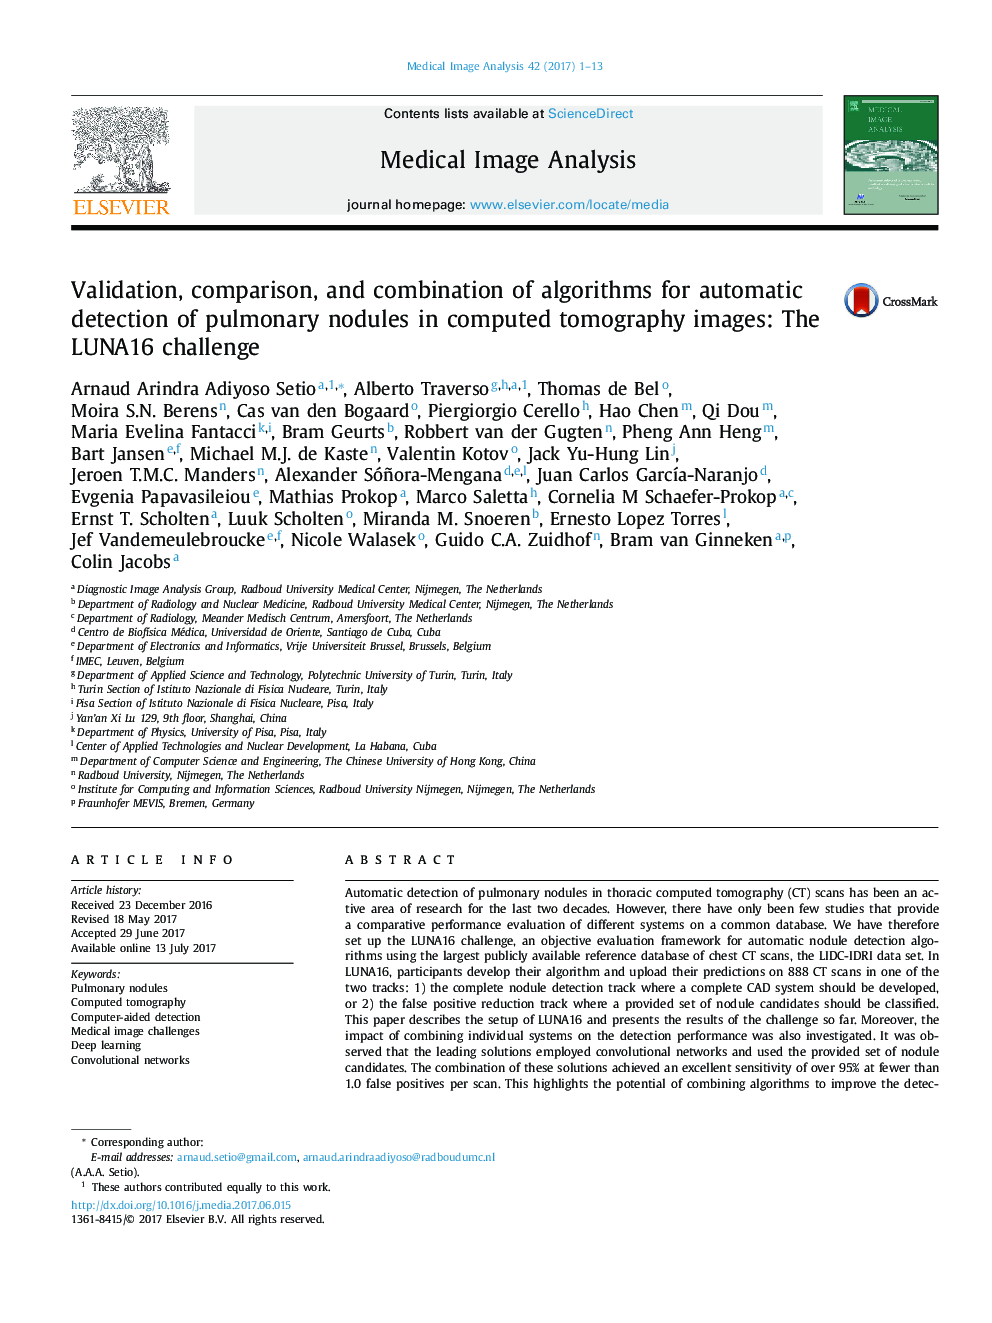 Validation, comparison, and combination of algorithms for automatic detection of pulmonary nodules in computed tomography images: The LUNA16 challenge